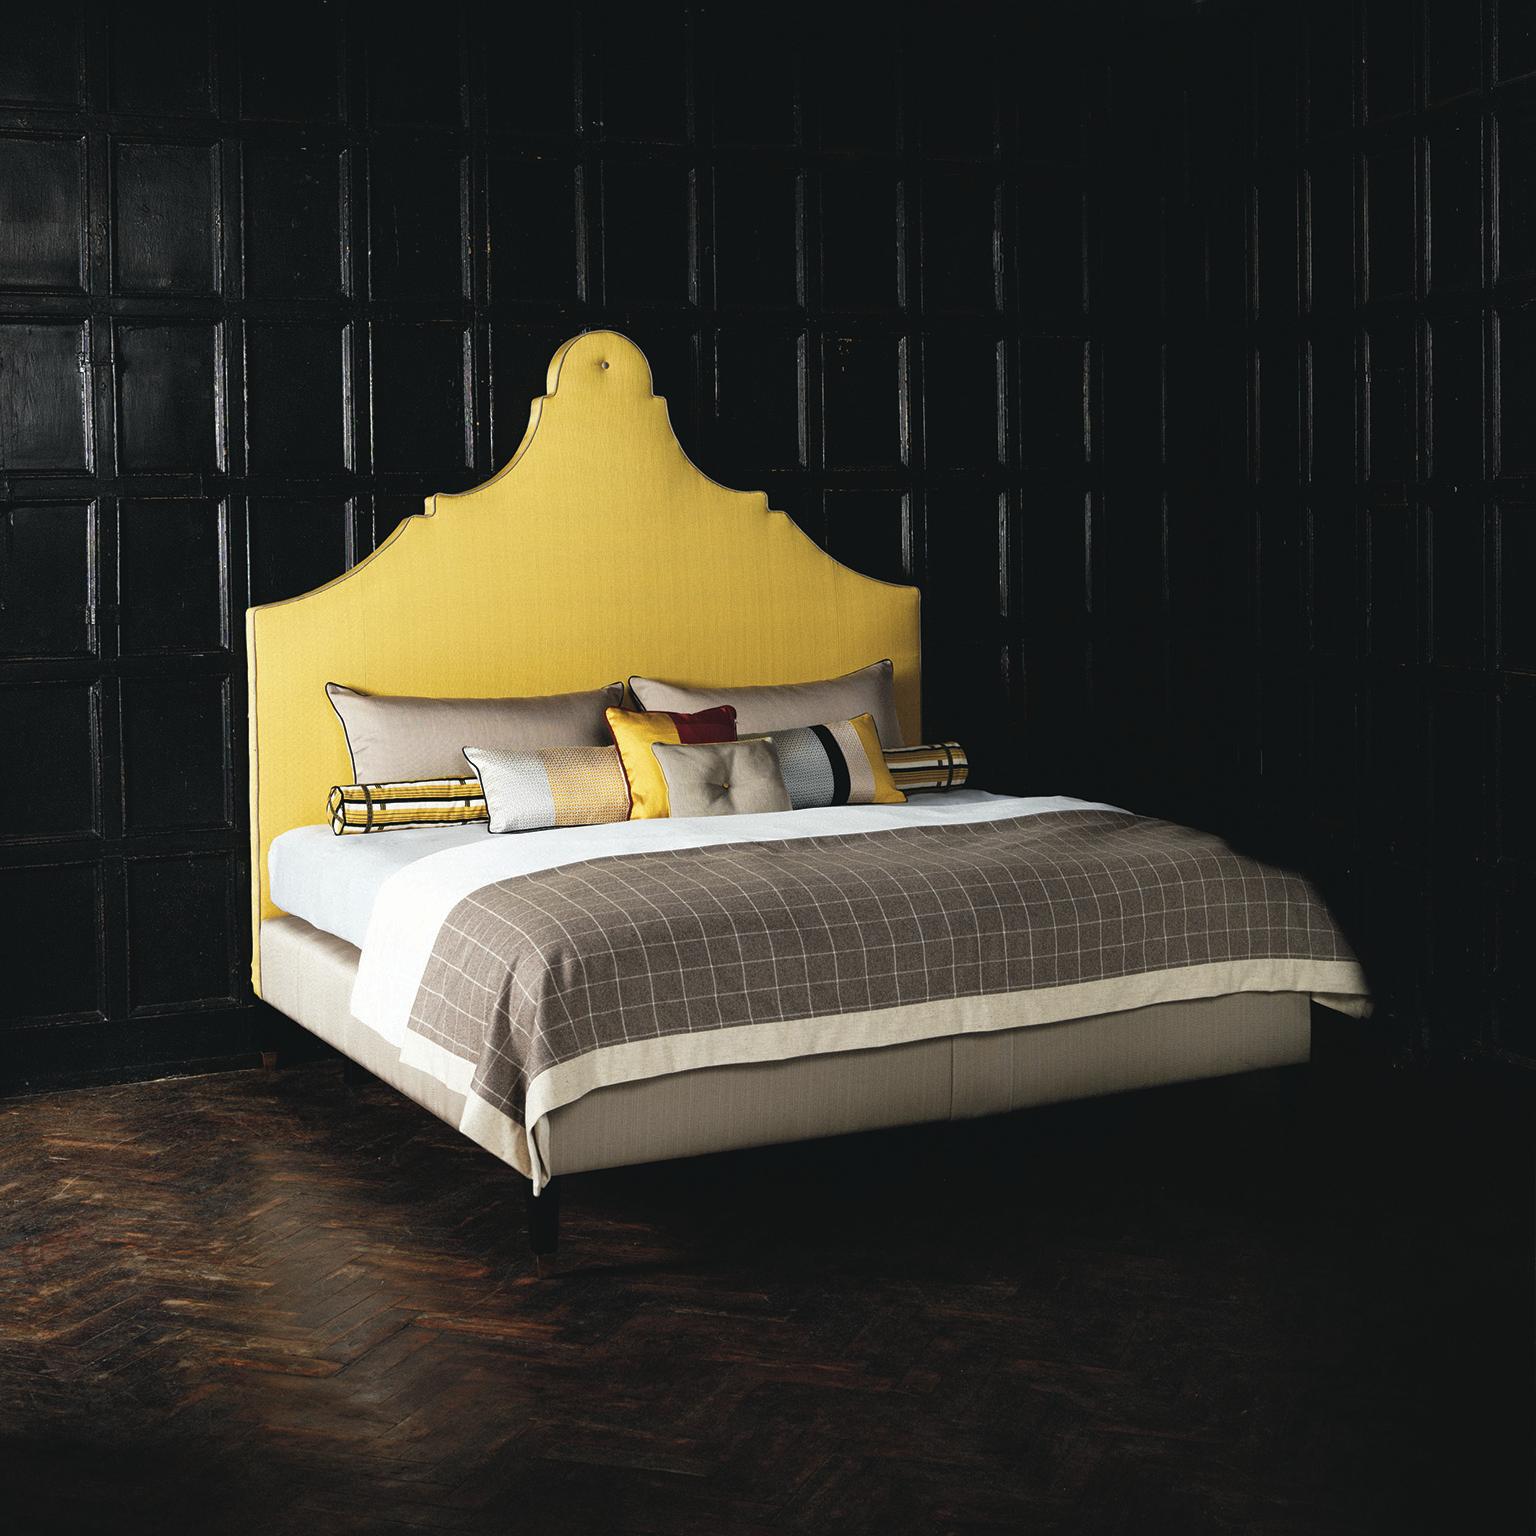 A traditional shaped headboard with elegant curves and an eye-catching colour palette, the Claudia bed makes a statement. Upholstered in canary yellow with a contrasting taupe base, the design is finished with crisp piping and a feature button.